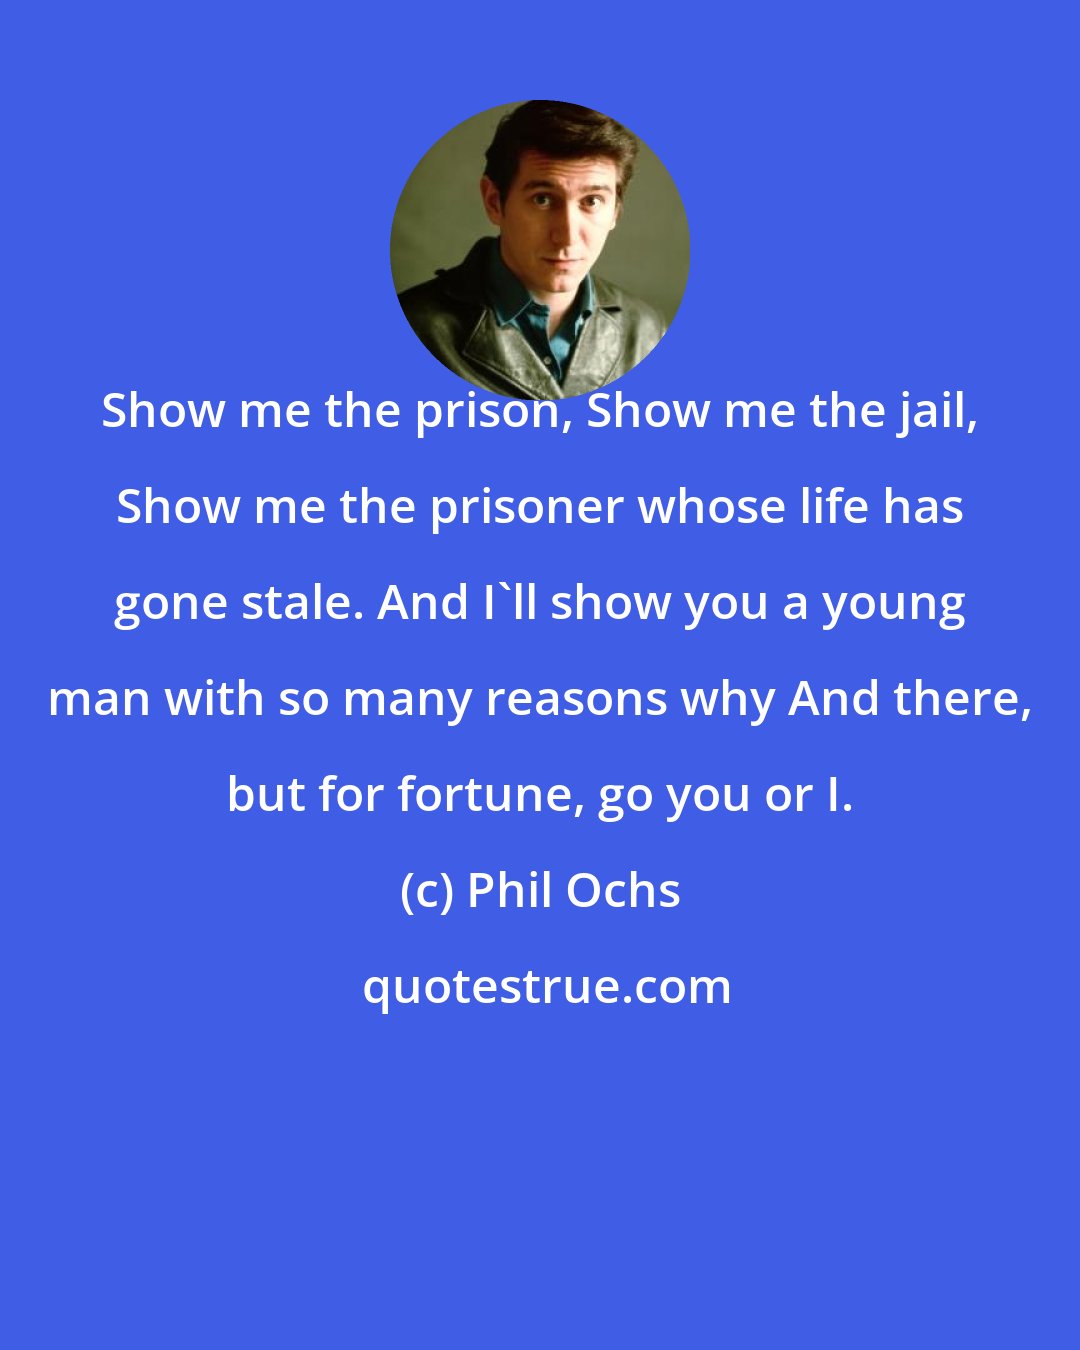 Phil Ochs: Show me the prison, Show me the jail, Show me the prisoner whose life has gone stale. And I'll show you a young man with so many reasons why And there, but for fortune, go you or I.